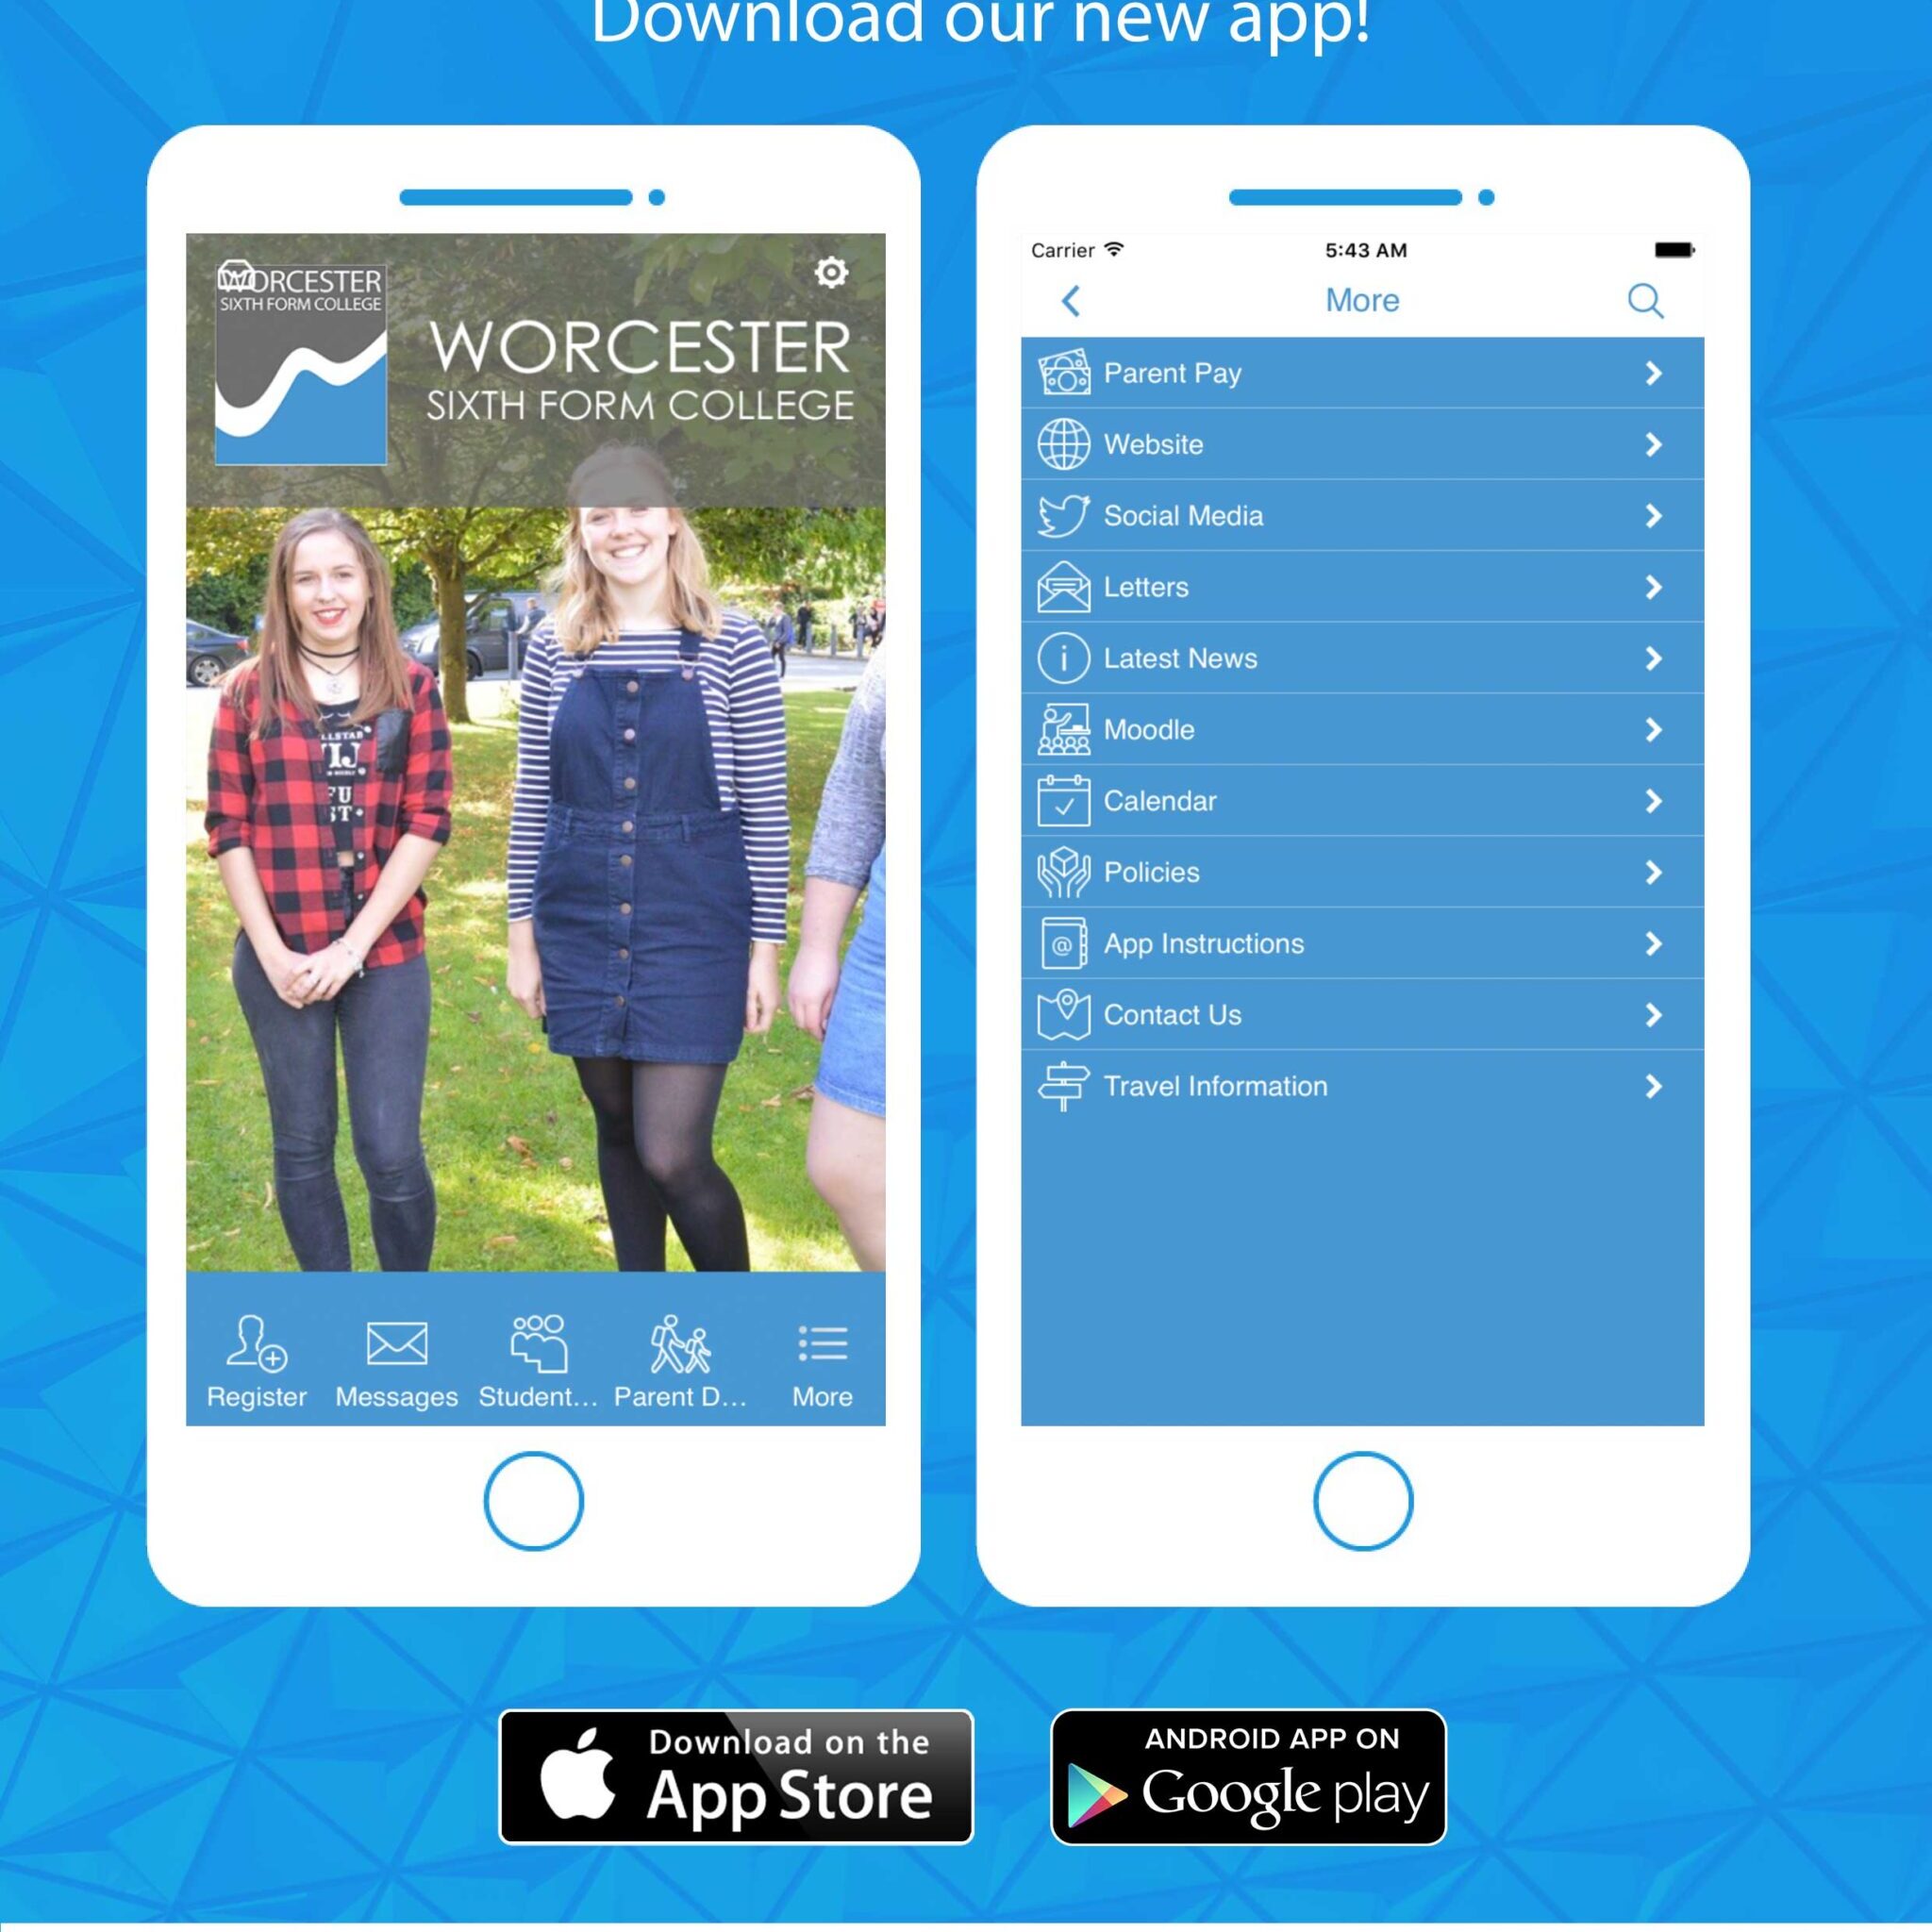 WSFC_Launch_of_new_College_App